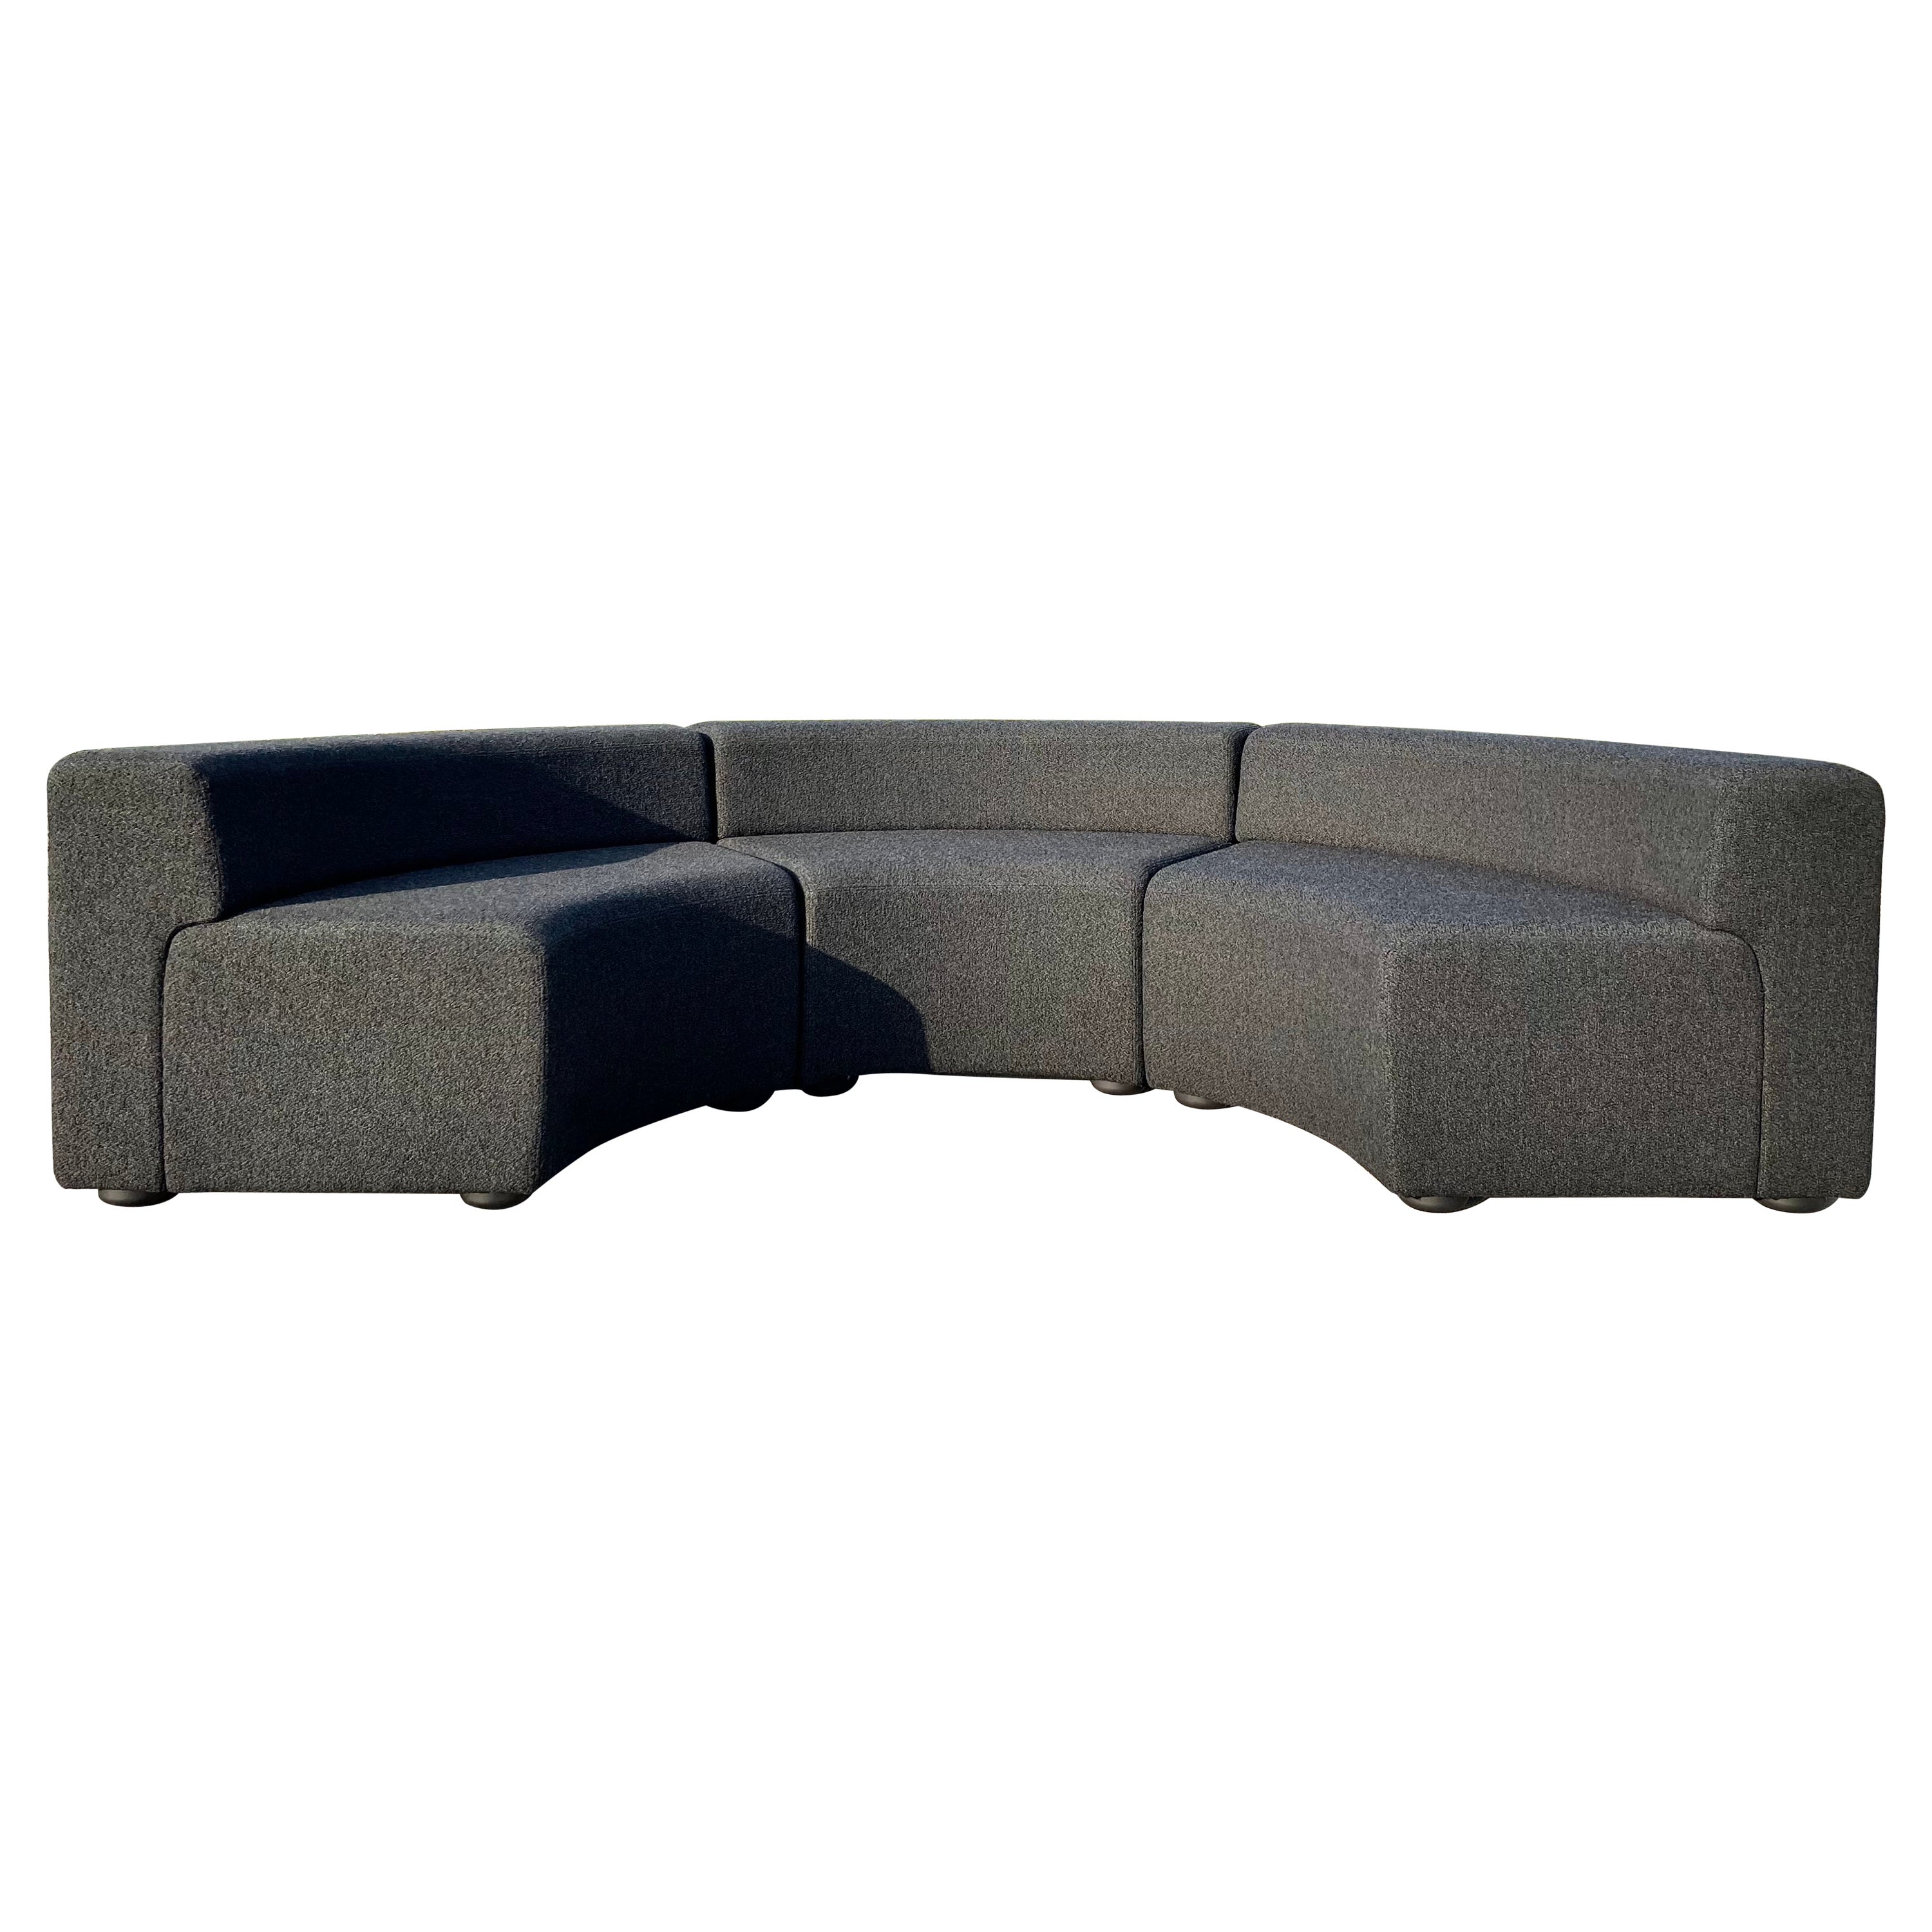 Knoll Curved Modular Sofa in Charcoal Wool Boucle For Sale